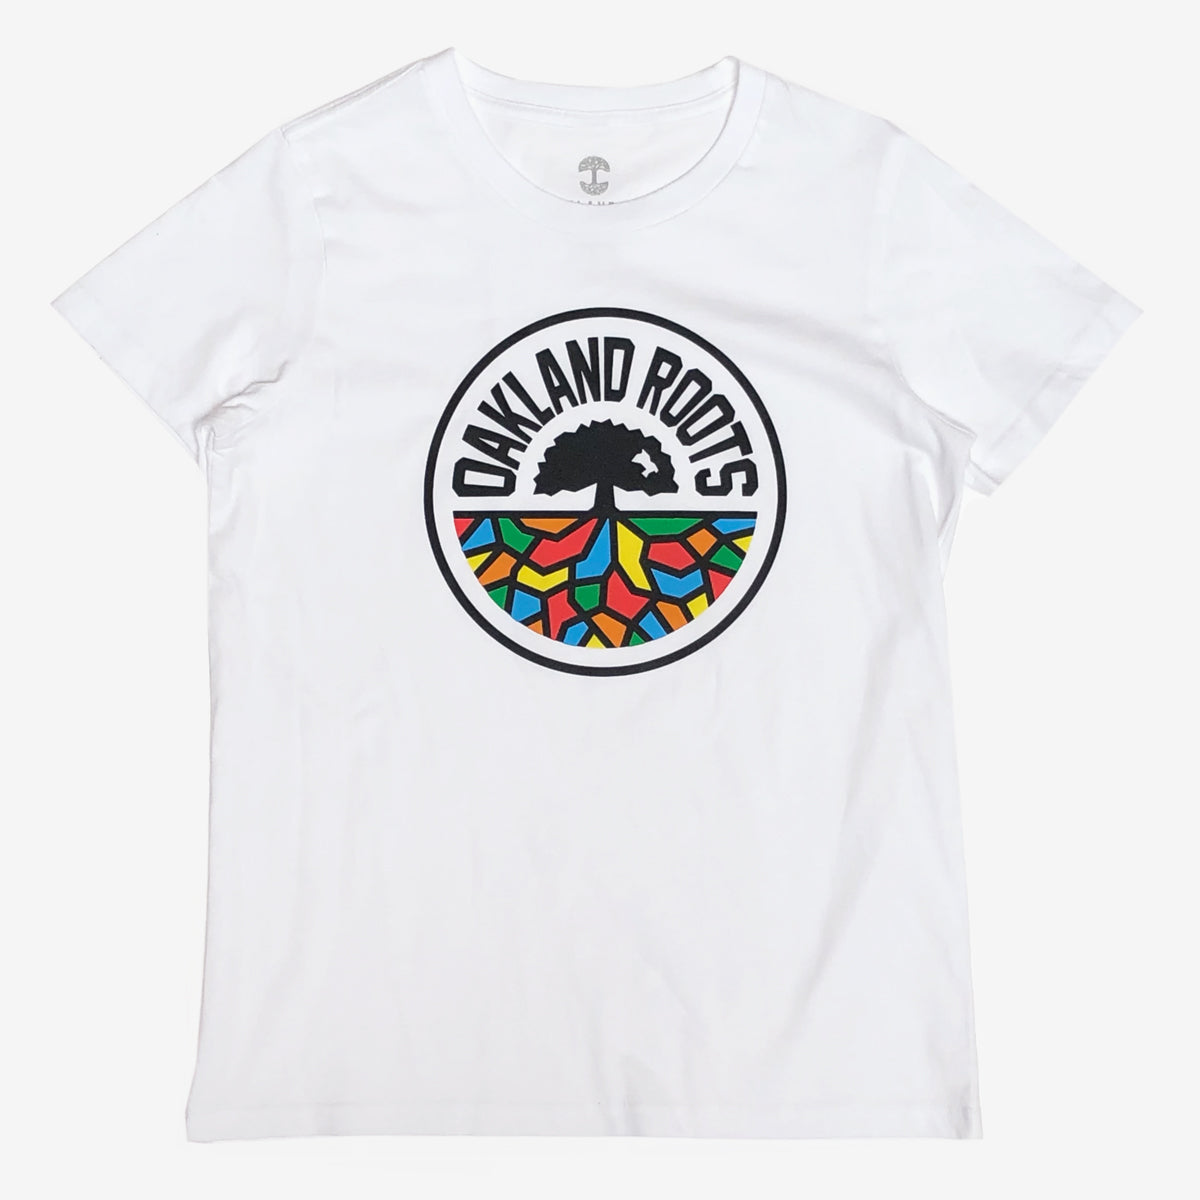 A white women’s cut t-shirt with a full-color Roots SC logo on the chest.